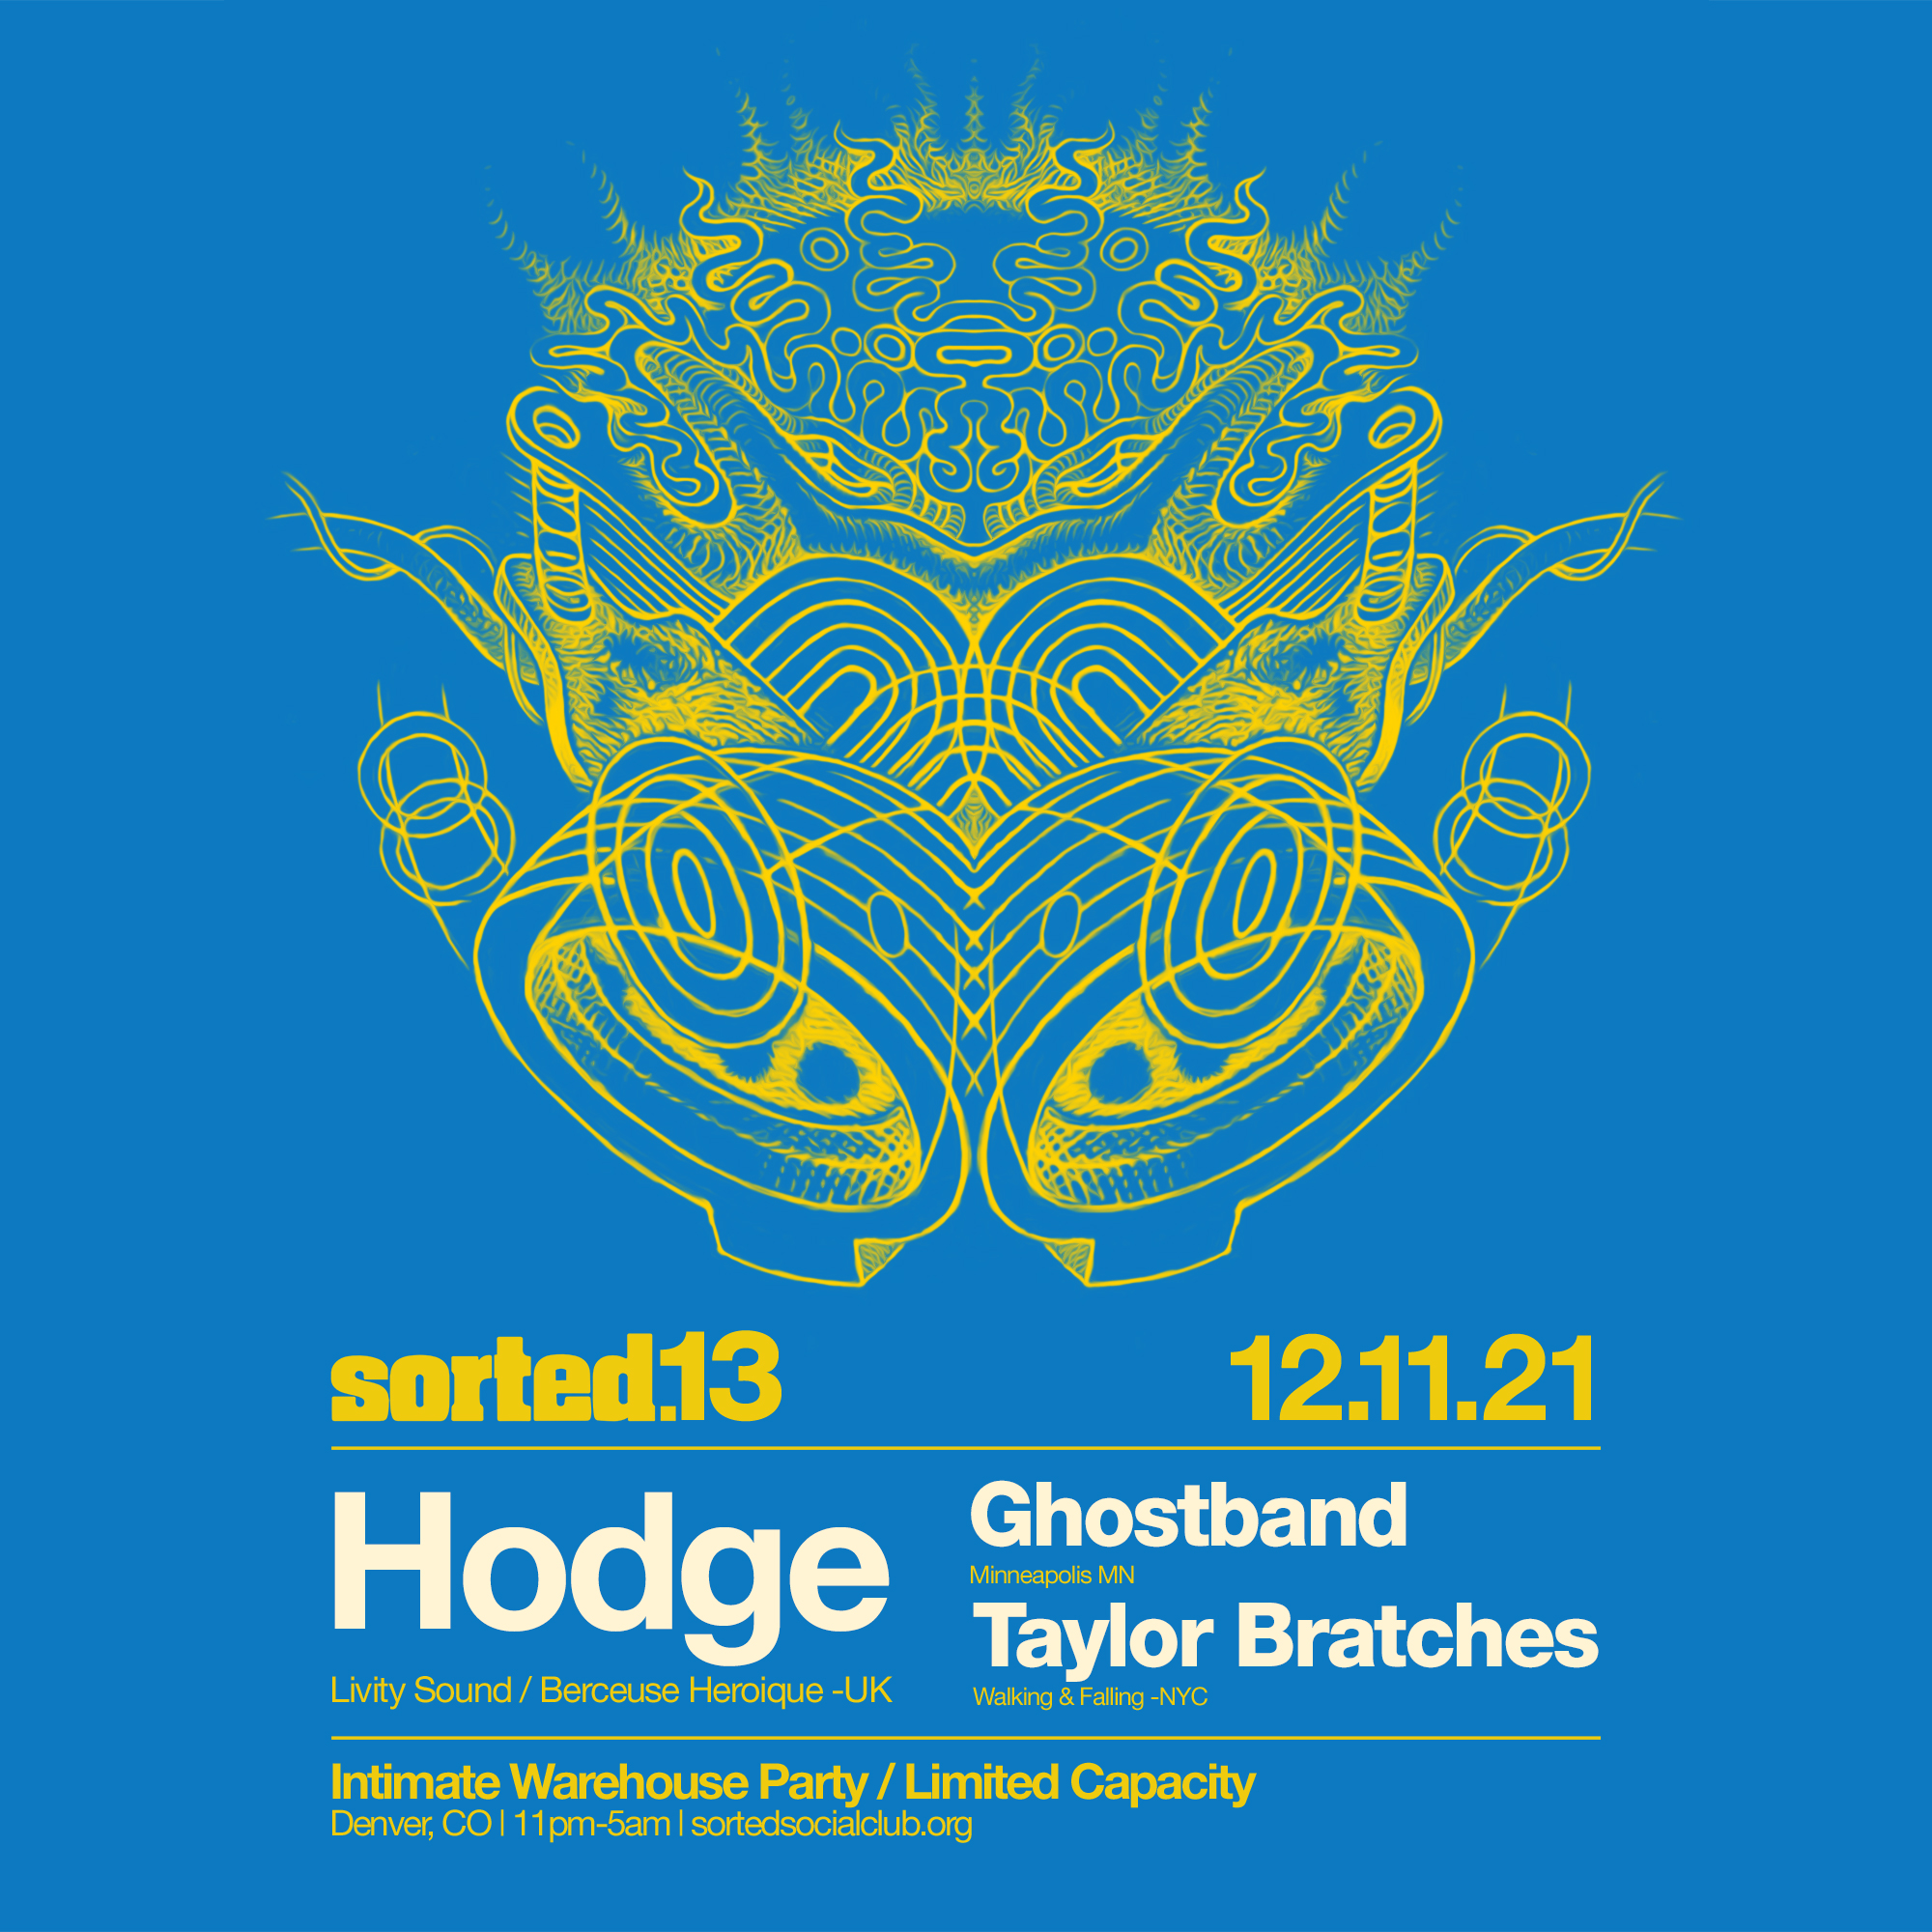 Sorted #13 – Hodge, Taylor Bratches, Ghostband